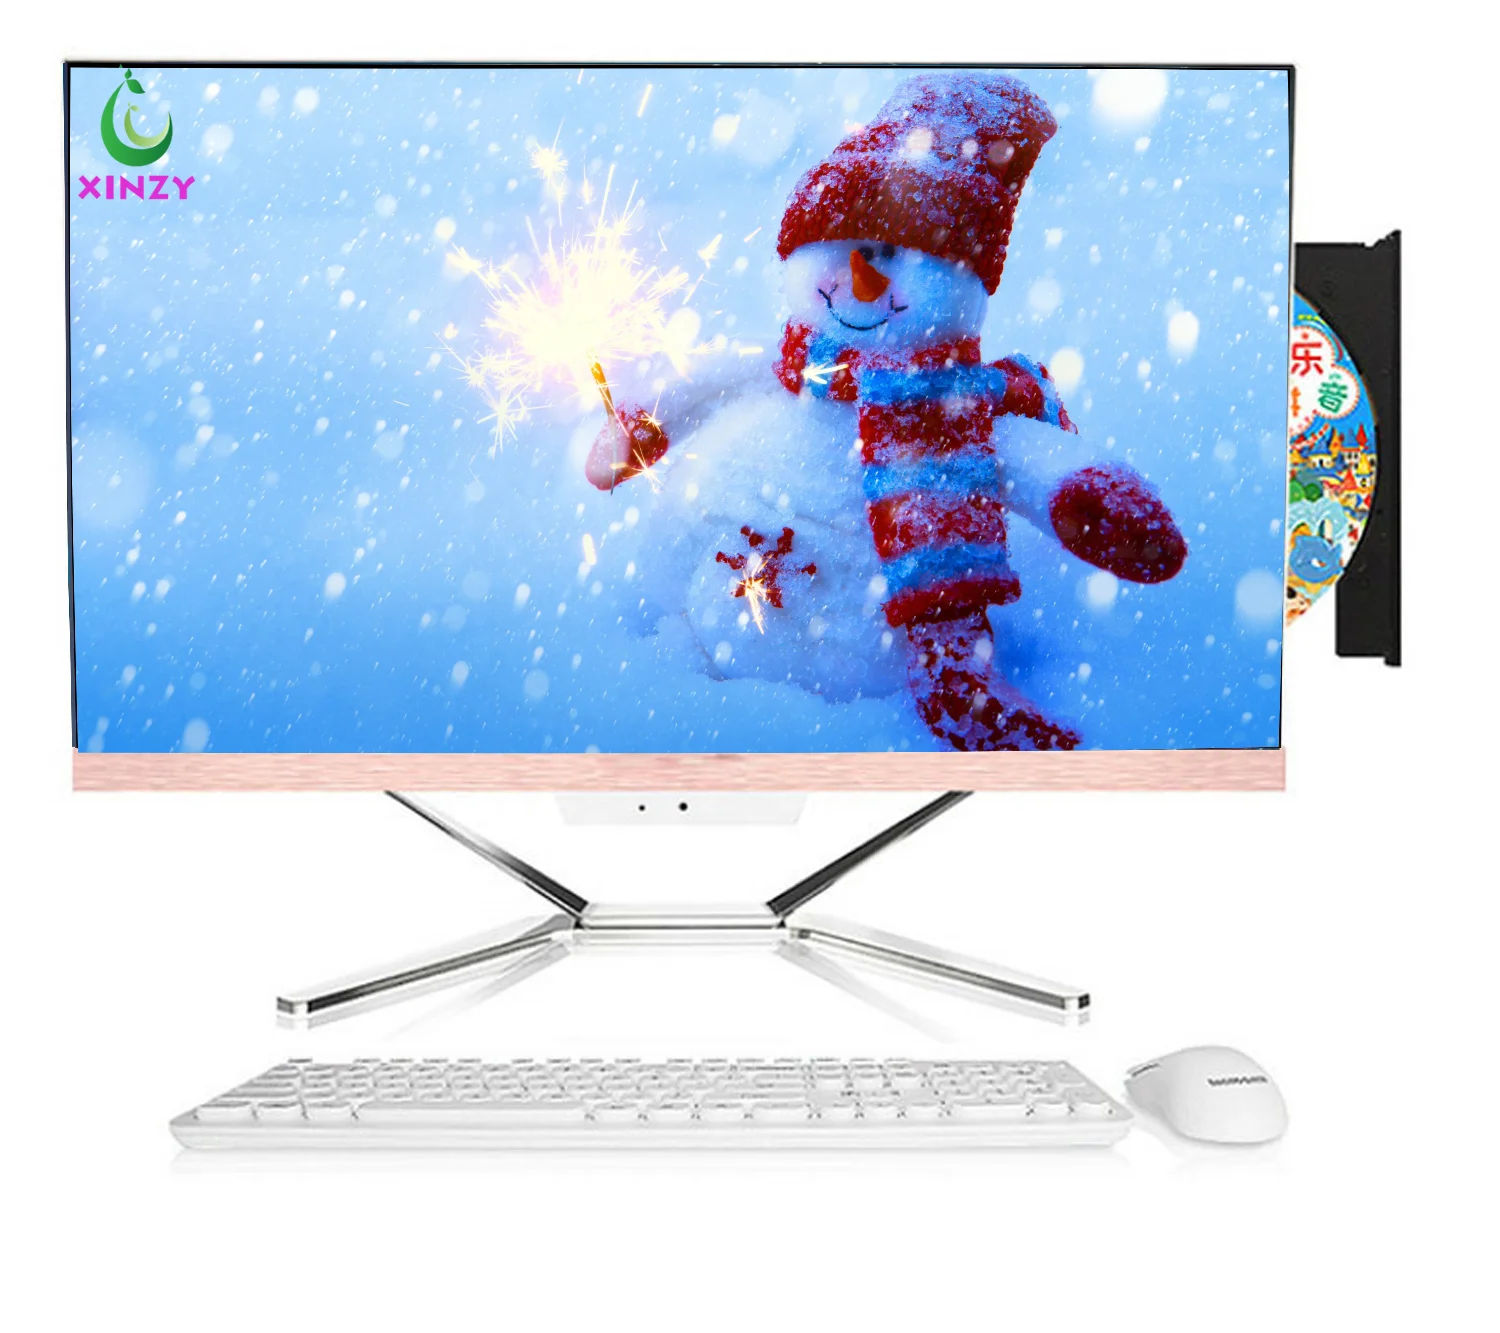 

XINZY all in one 24 inch desktop computer core i3 i5 i9 processor 2/4/8G RAM Memory 120/ 240GB SSD 320GB HDD business aio pc